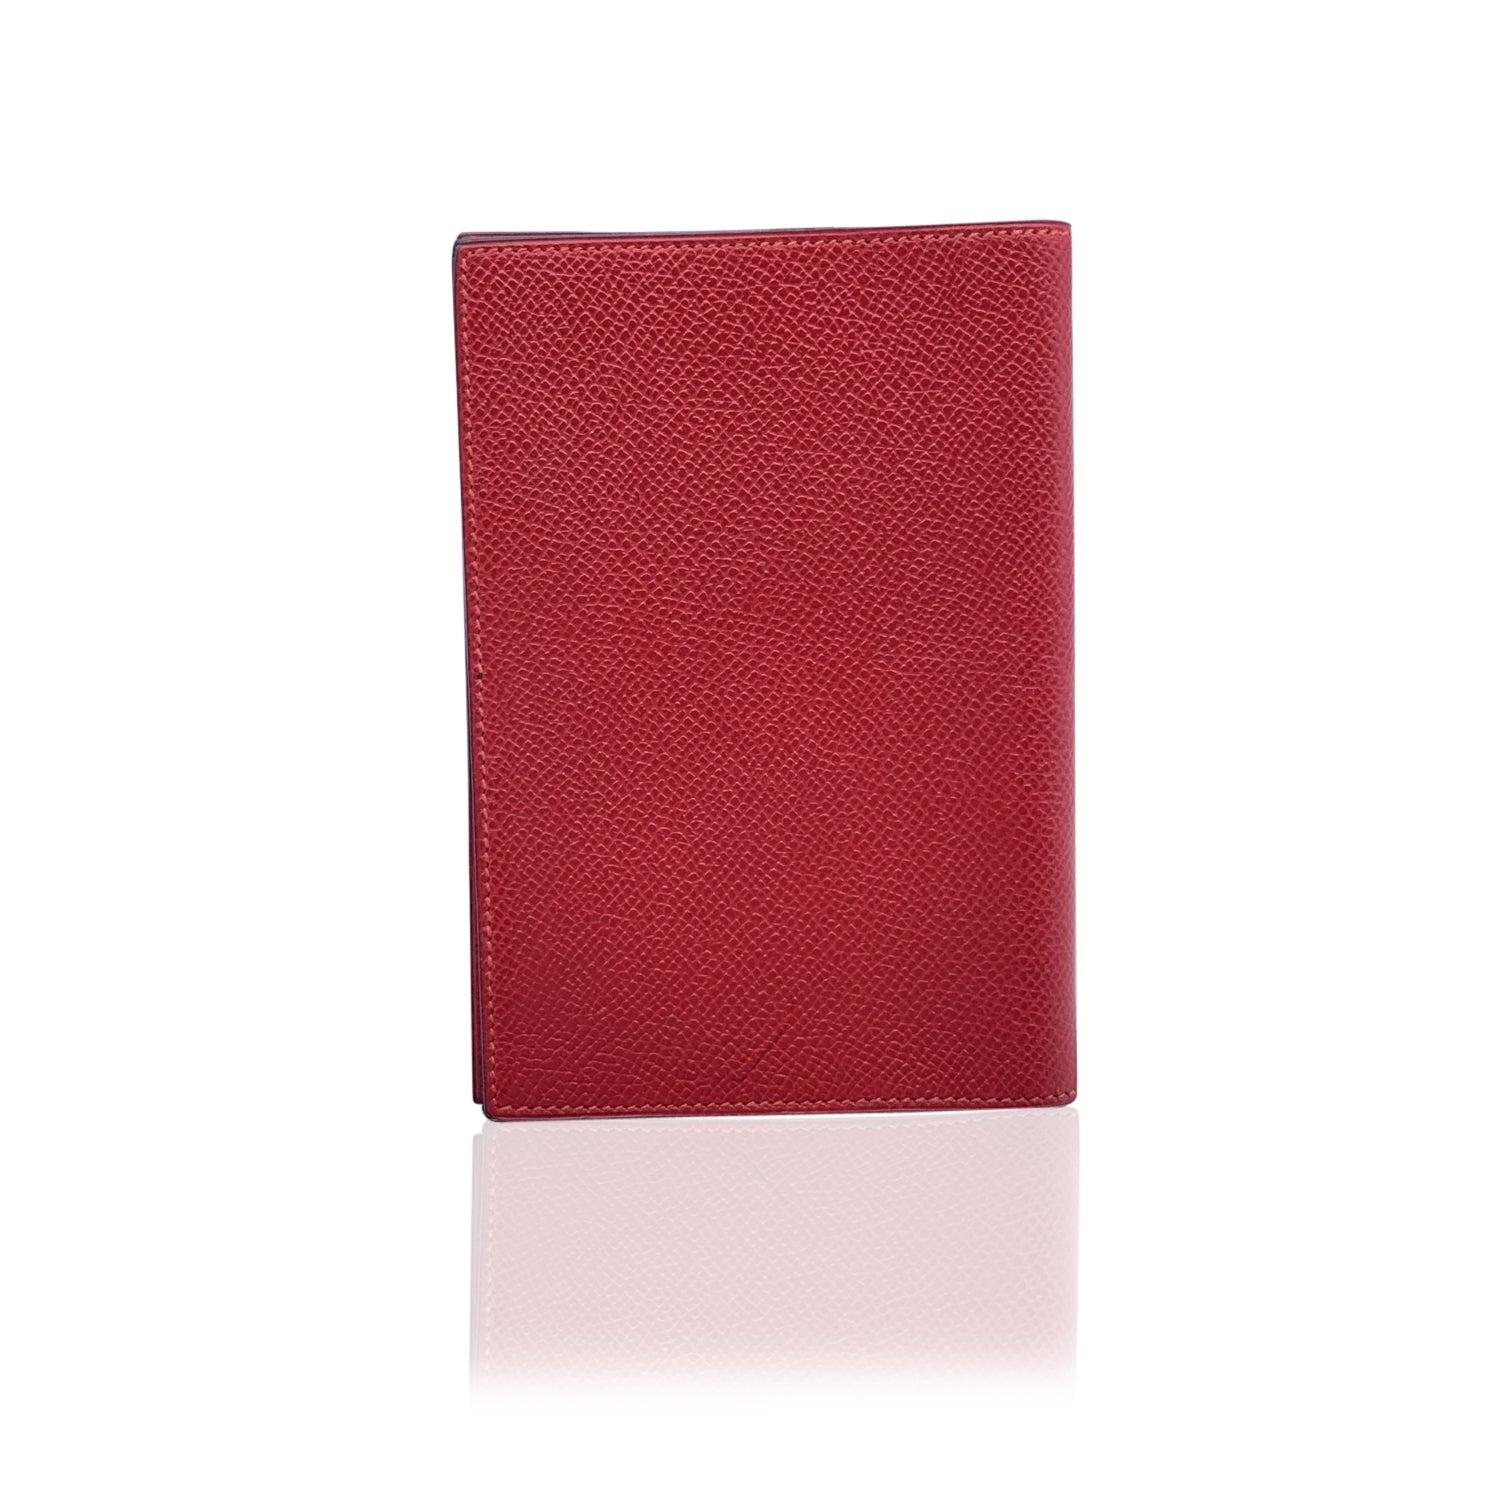 Vintage Agenda/Notebook Simple cover by Hermes crafted in red leather. Silver metal binding in center and 1 slot for a notebook on each side. 'HERMES Paris - Made in France' embossed inside, blind stamp is a 'R' in a Circle (which means that the